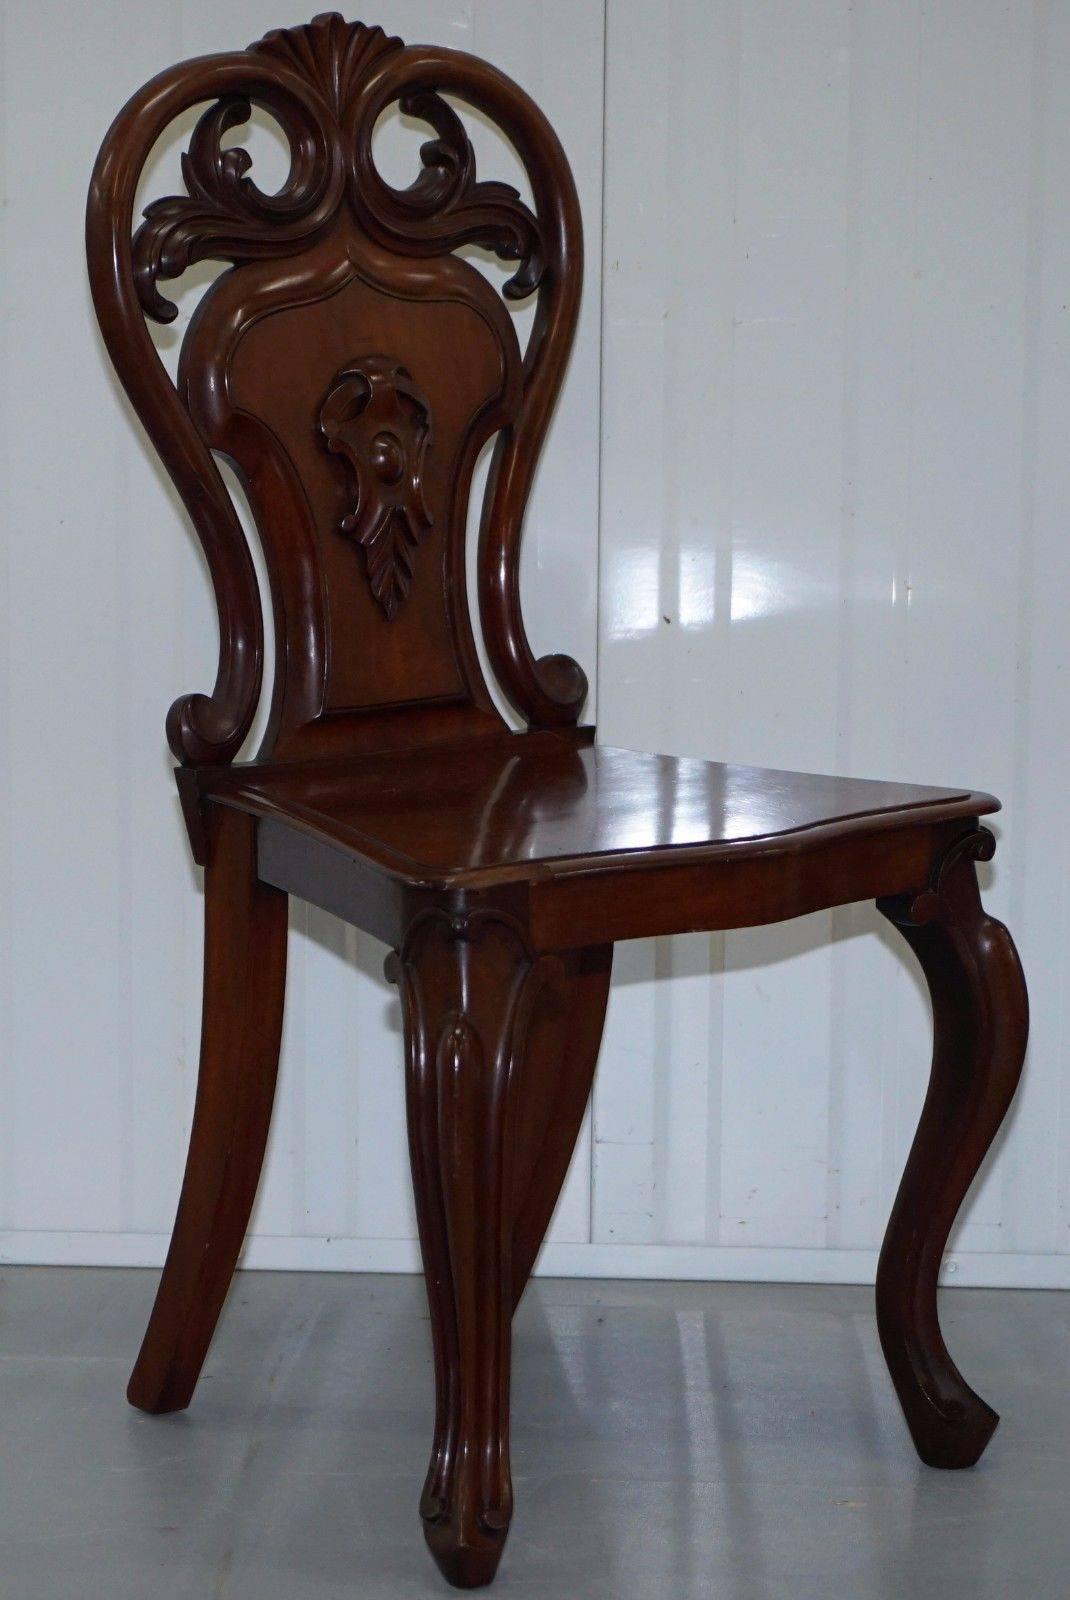 We are delighted to offer for sale this stunning pair of Victorian, circa 1870 solid mahogany hand-carved shield back hall chairs

These would look at home in a period medieval castle and in a city townhouse, they are stylish and charming, the